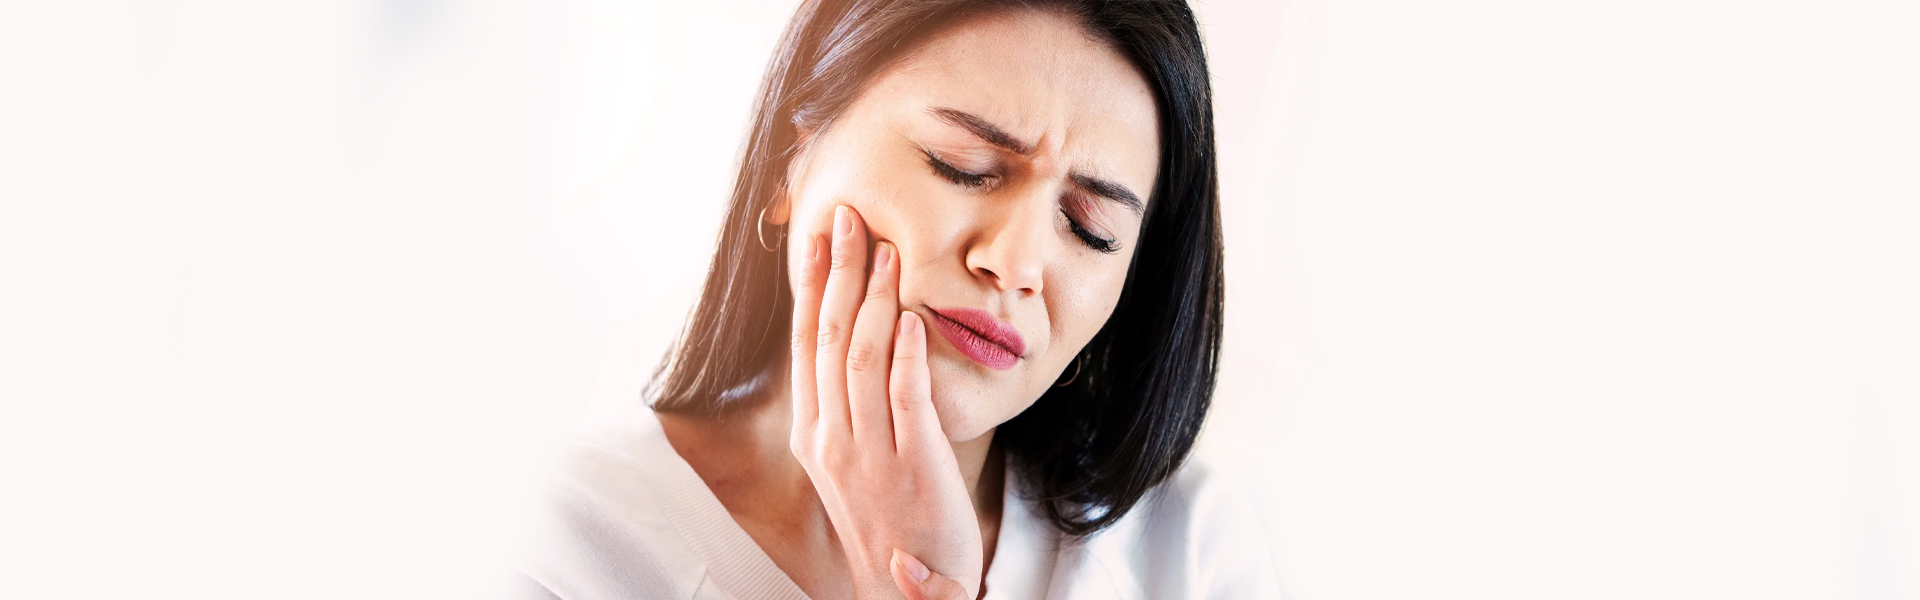 What Incidences Are Considered as Dental Emergencies and Why Do You Need to Know an Emergency Dentist?